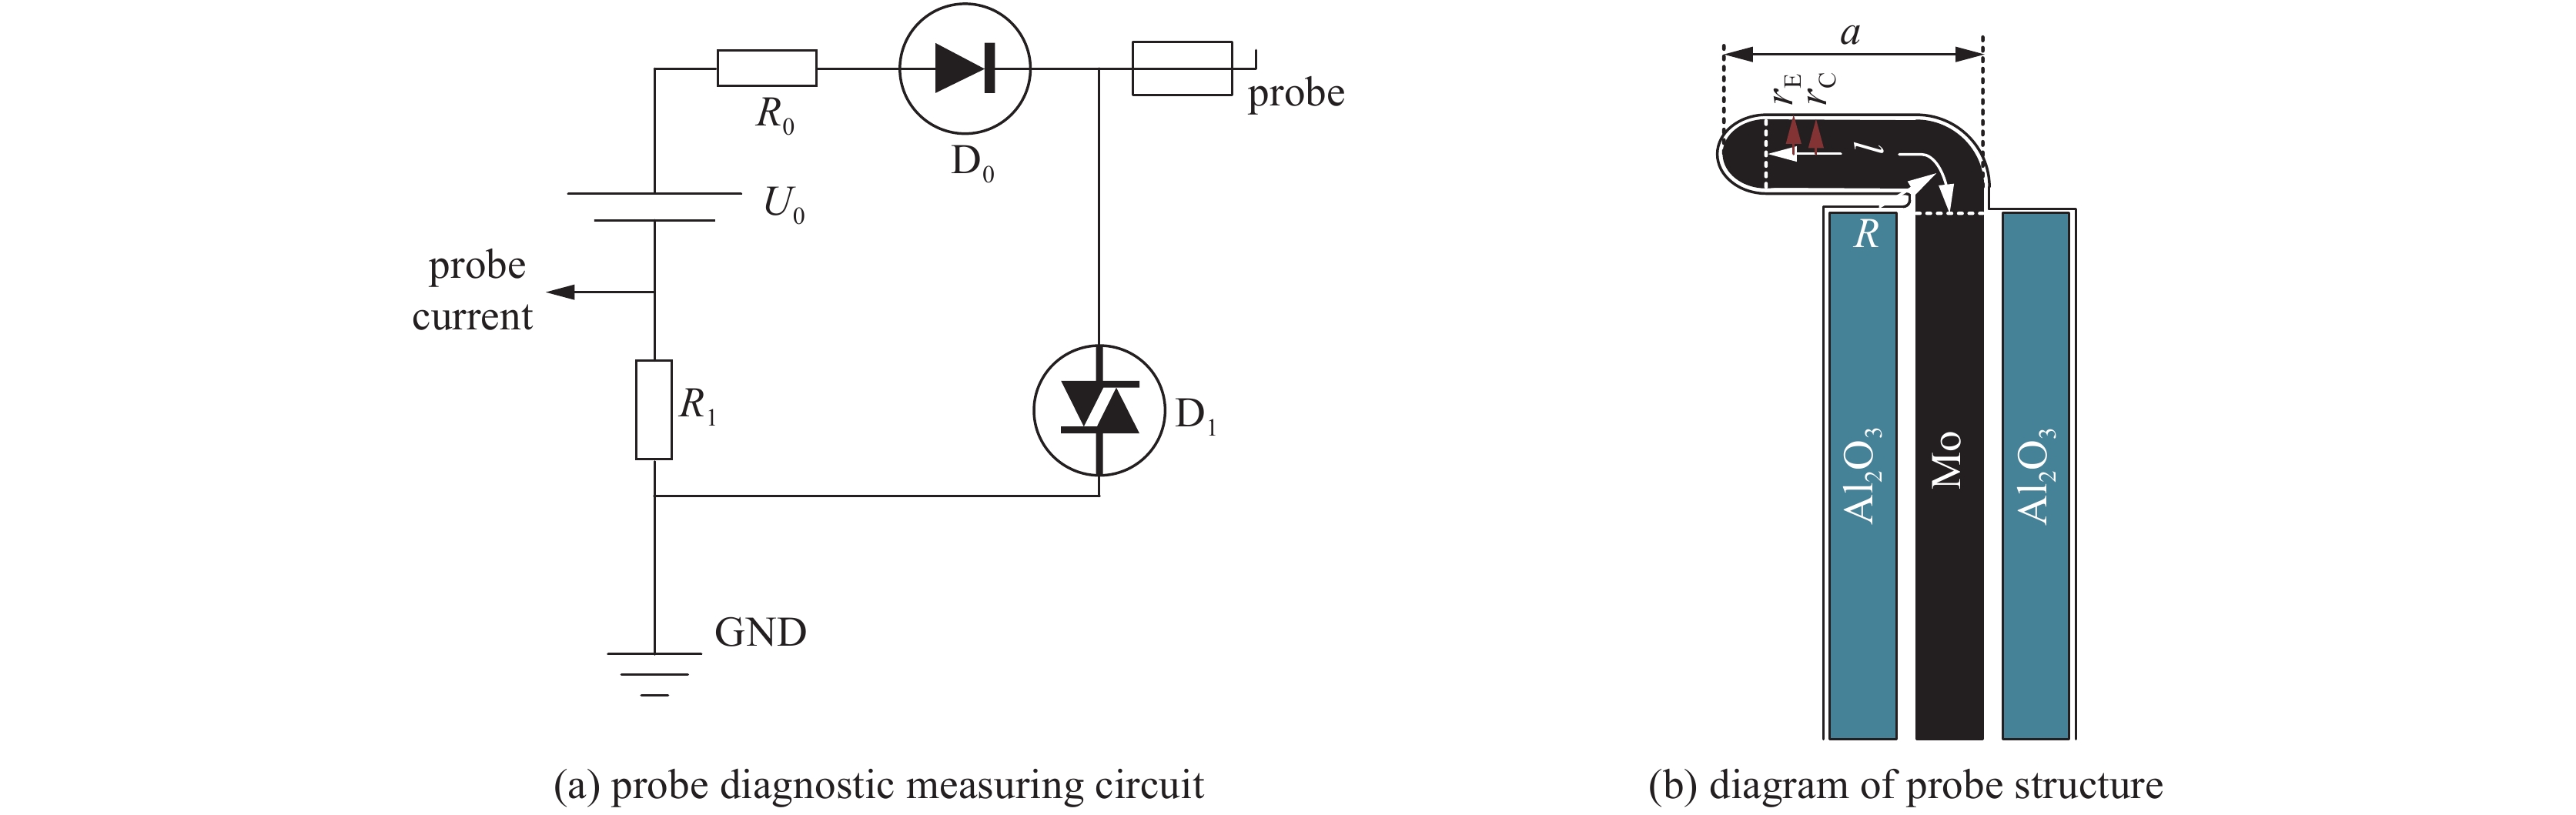 Probe diagnostic circuit and structure